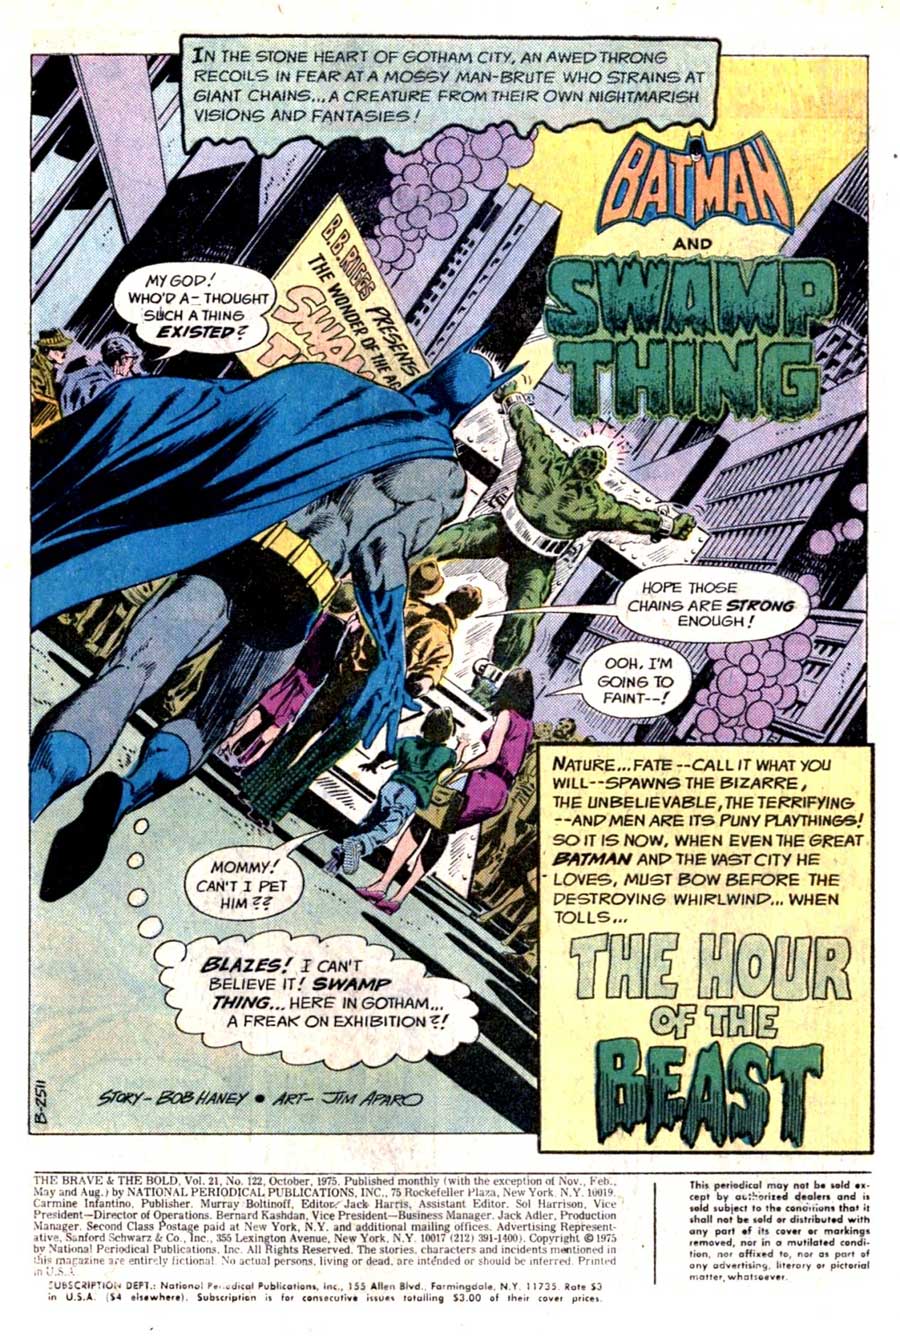 The Brave and the Bold #122 by Bob Haney and Jim Aparo with Batman and Swamp Thing